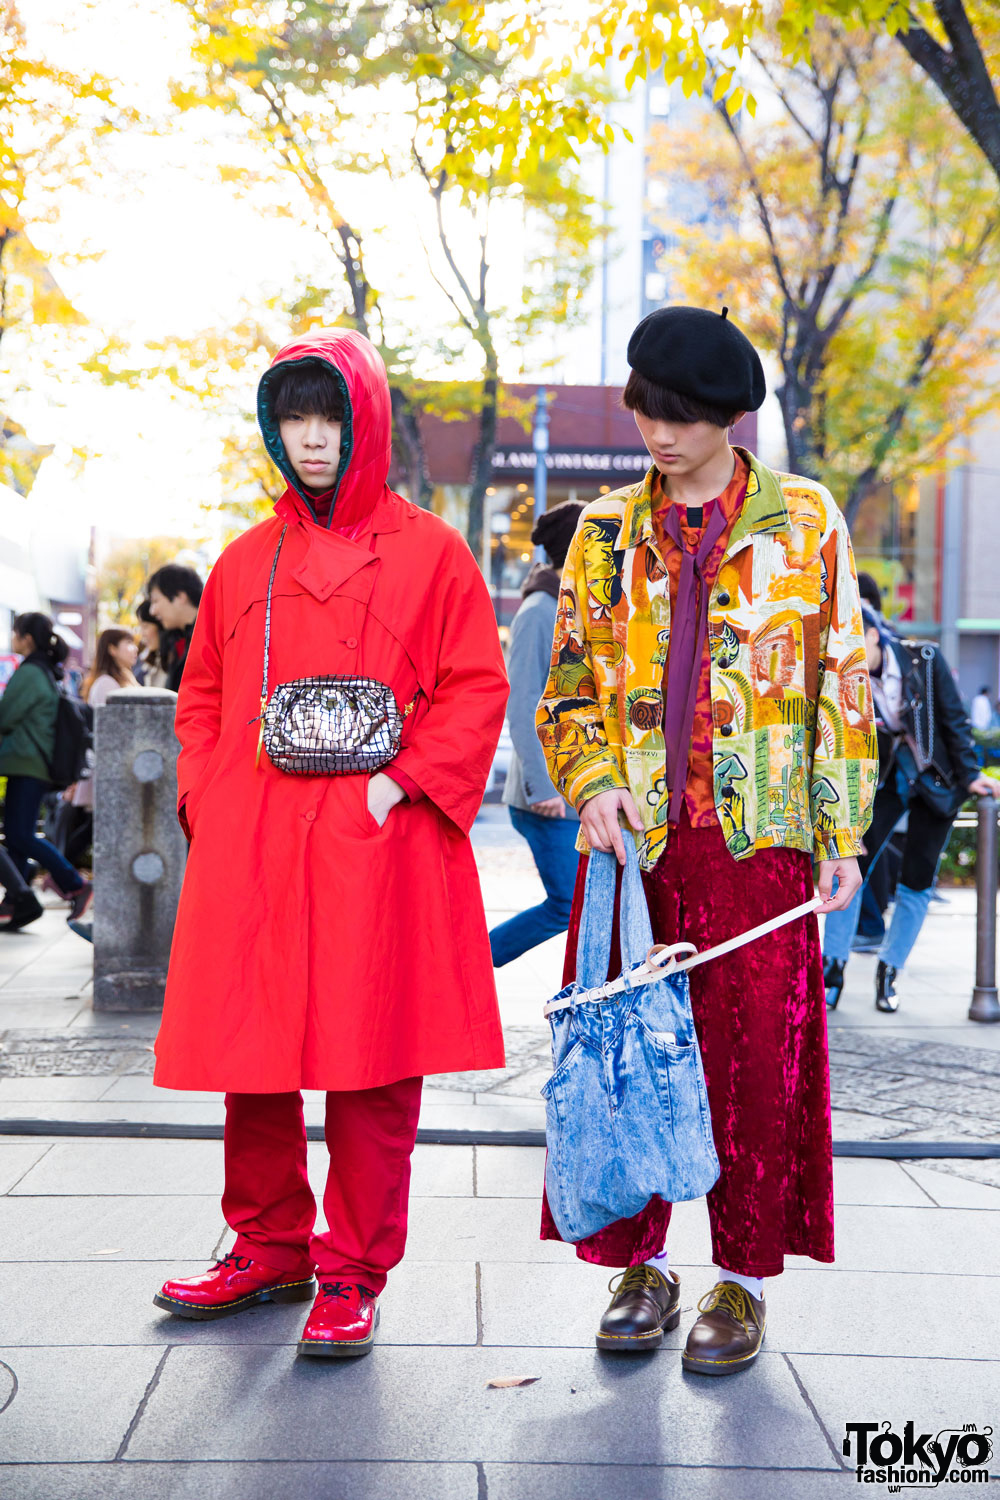 Harajuku Guys in All Red & Mixed Prints Fashion w/ Yves Saint Laurent, Dr. Martens, Levi's 517 & Hender Scheme